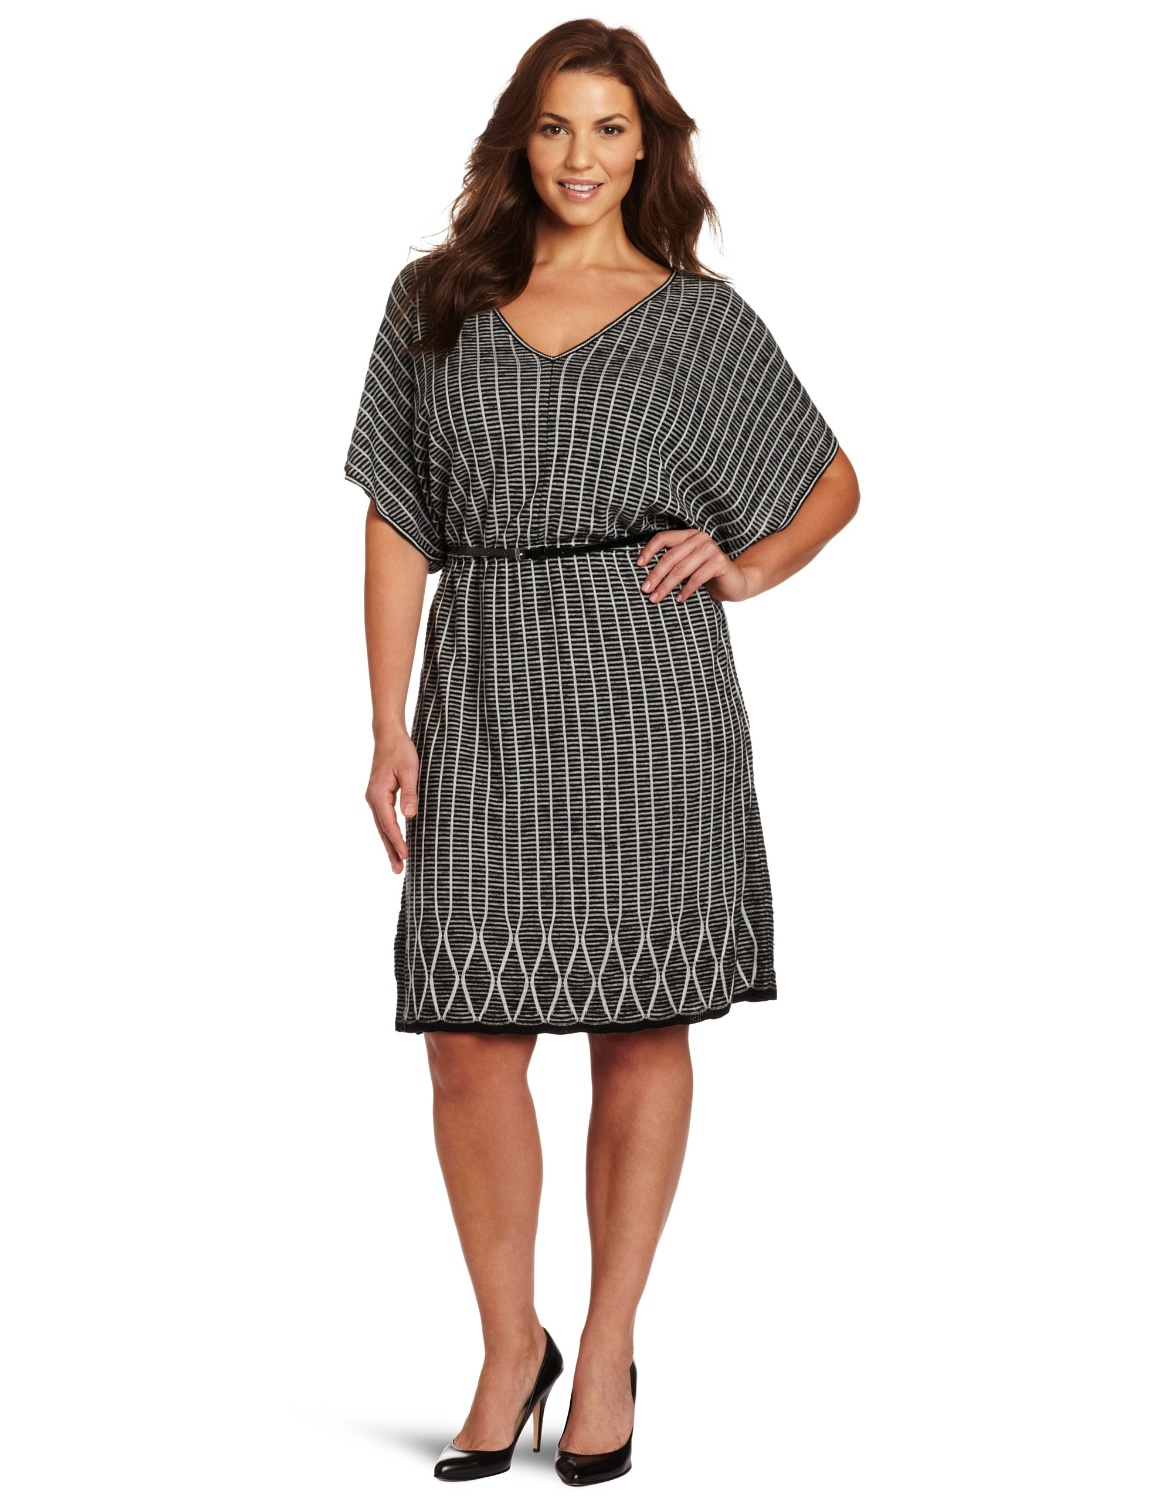 Download this Simple Plus Sized Dress Fact Some picture